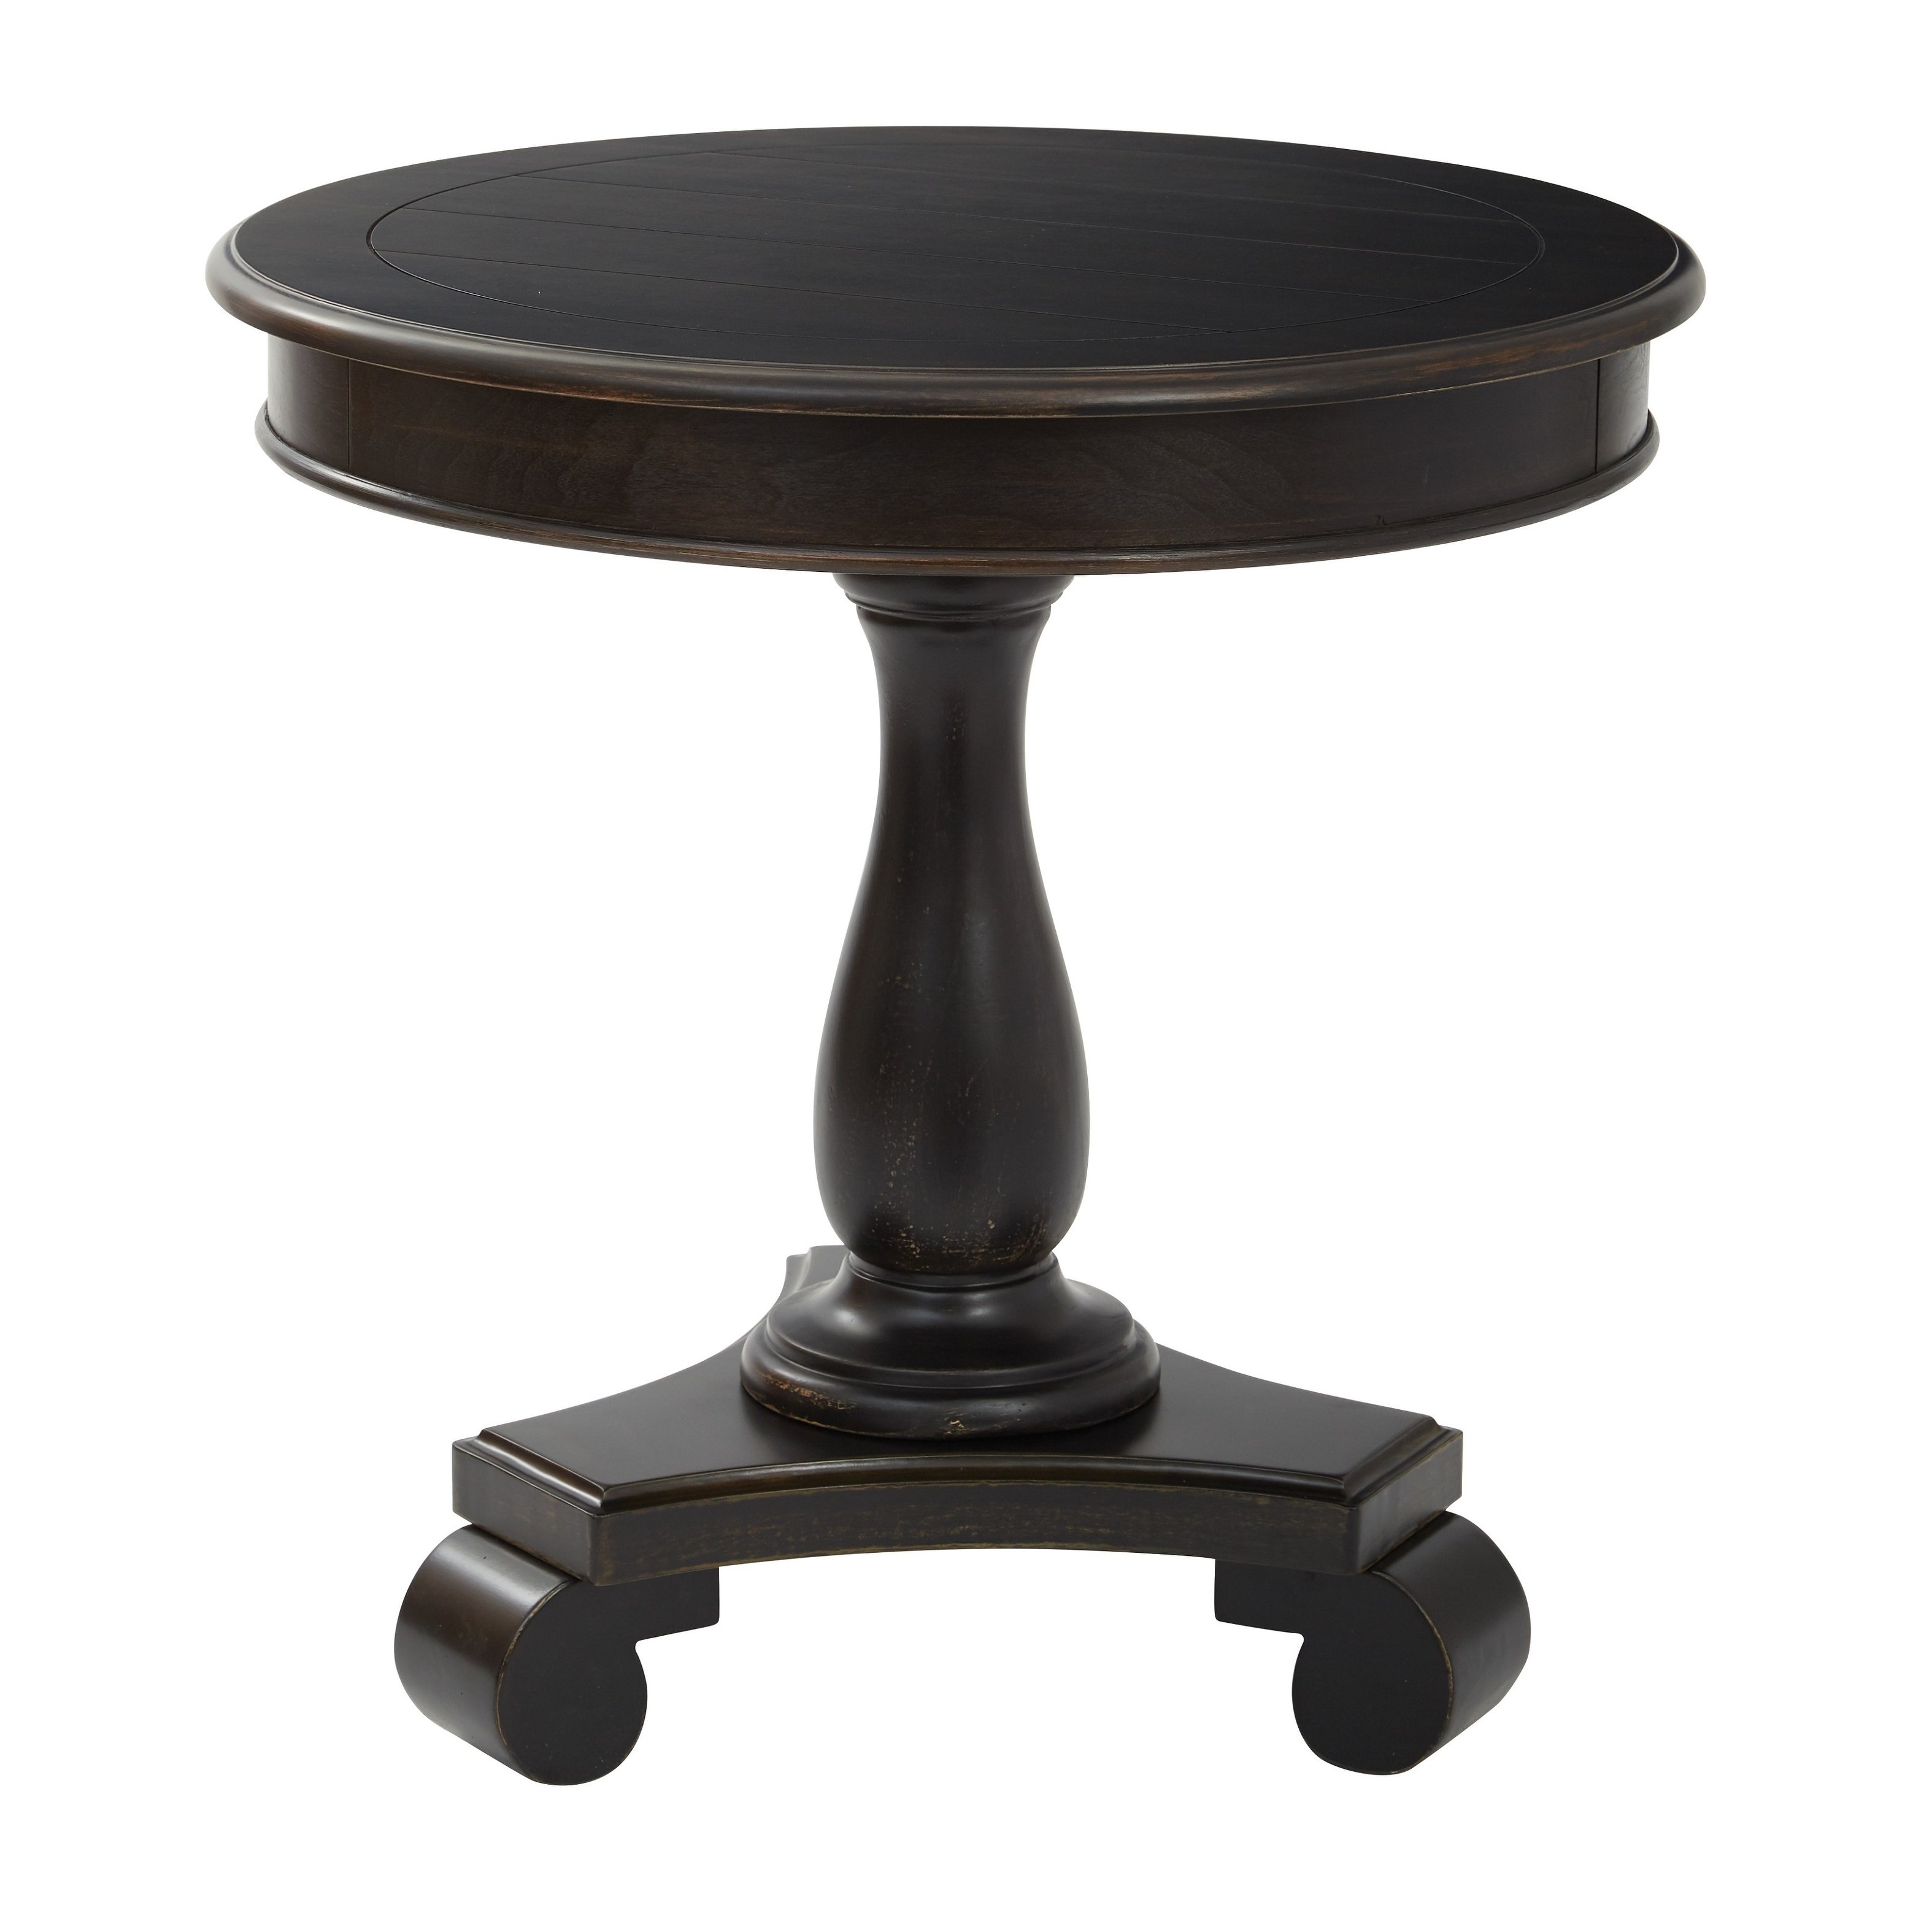 inspired bassett avalon round accent table antique black hand painted stock cherry end tables under wireless desk lamp footstool coffee pottery barn glass top dining modern grey